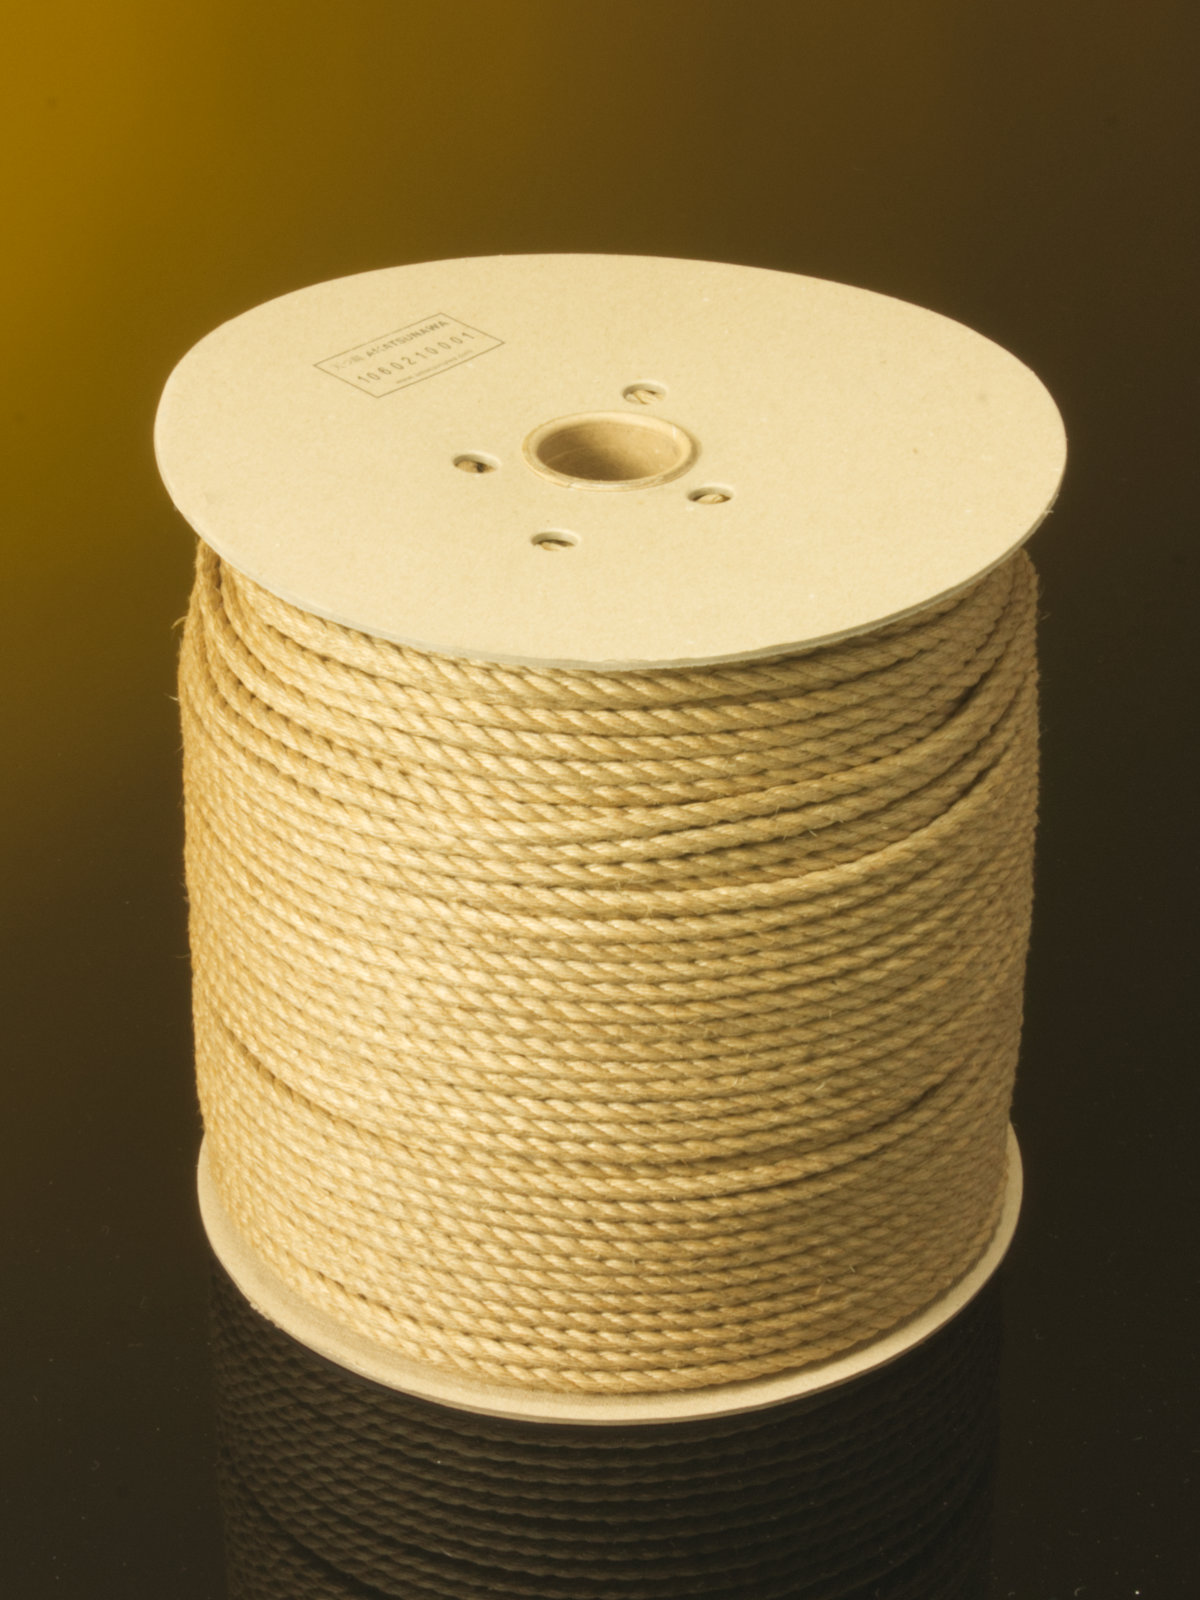 Jouyoku MAXI-ROLL, ~6kg, ∅6mm, 300m guaranteed, ready-for-use Japanese-made jute rope, JBO-free, NEW 2023 BATCH!